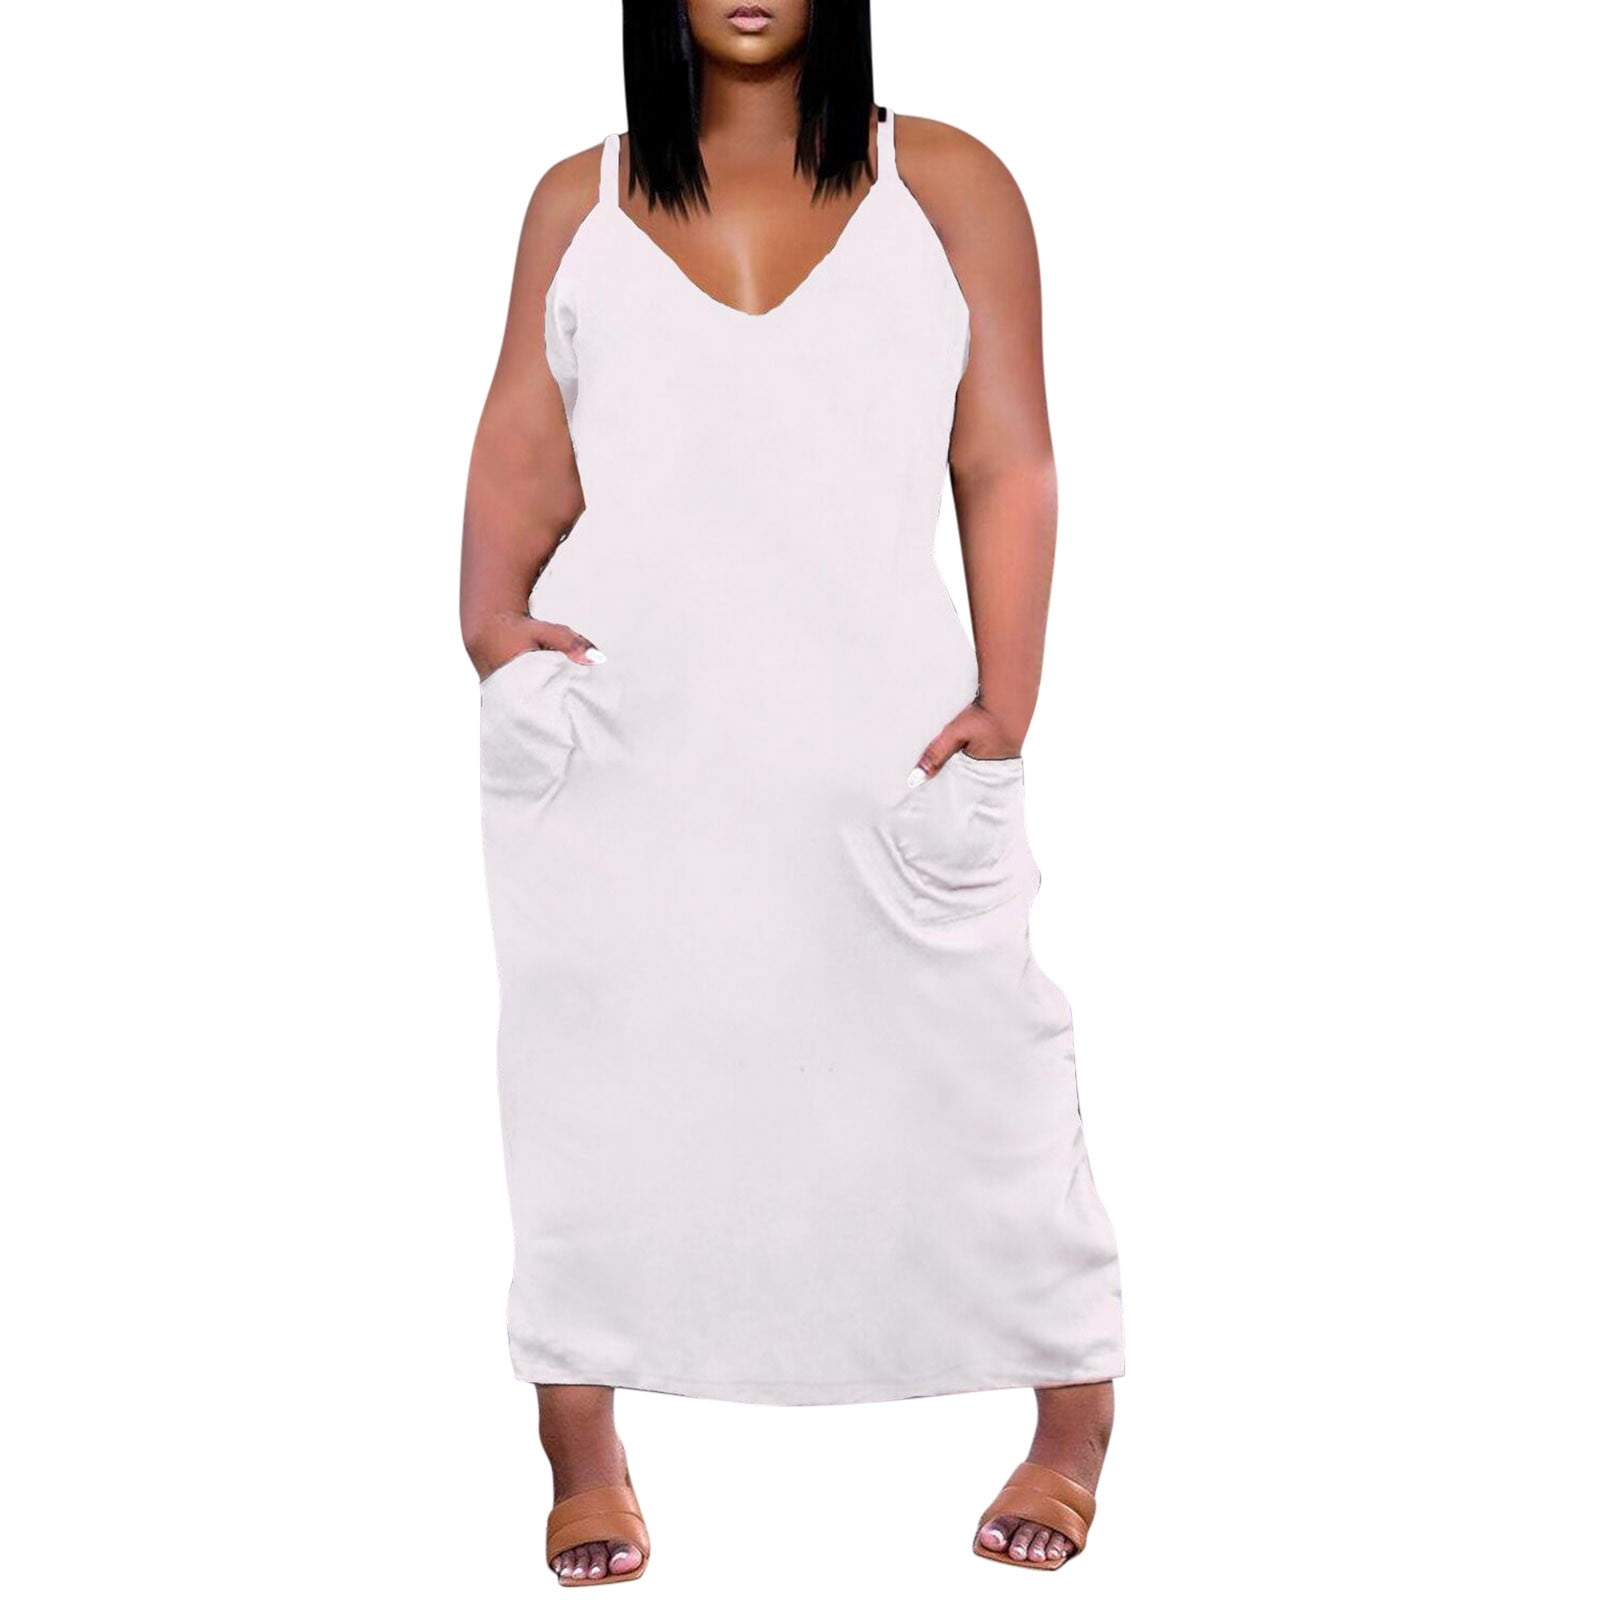 Plus Size Womens Denim Maxi Dress Sleeveless, Deep V Neck, Loose Fit, Sexy  Summer Meshki Clothing 210522 From Cong03, $10.67